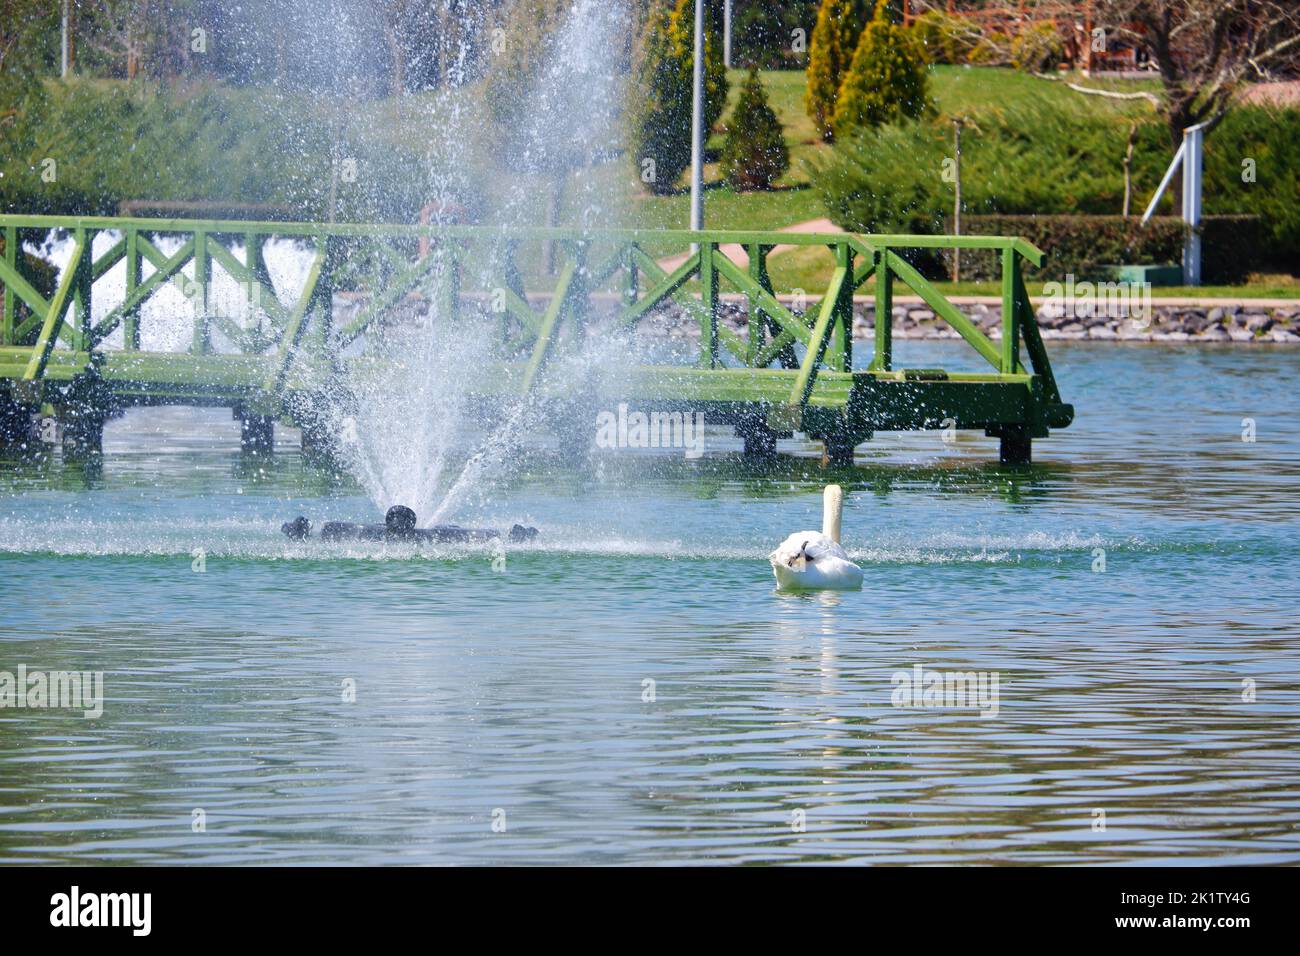 White Svan swimming at lake in park in a sunny day Stock Photo